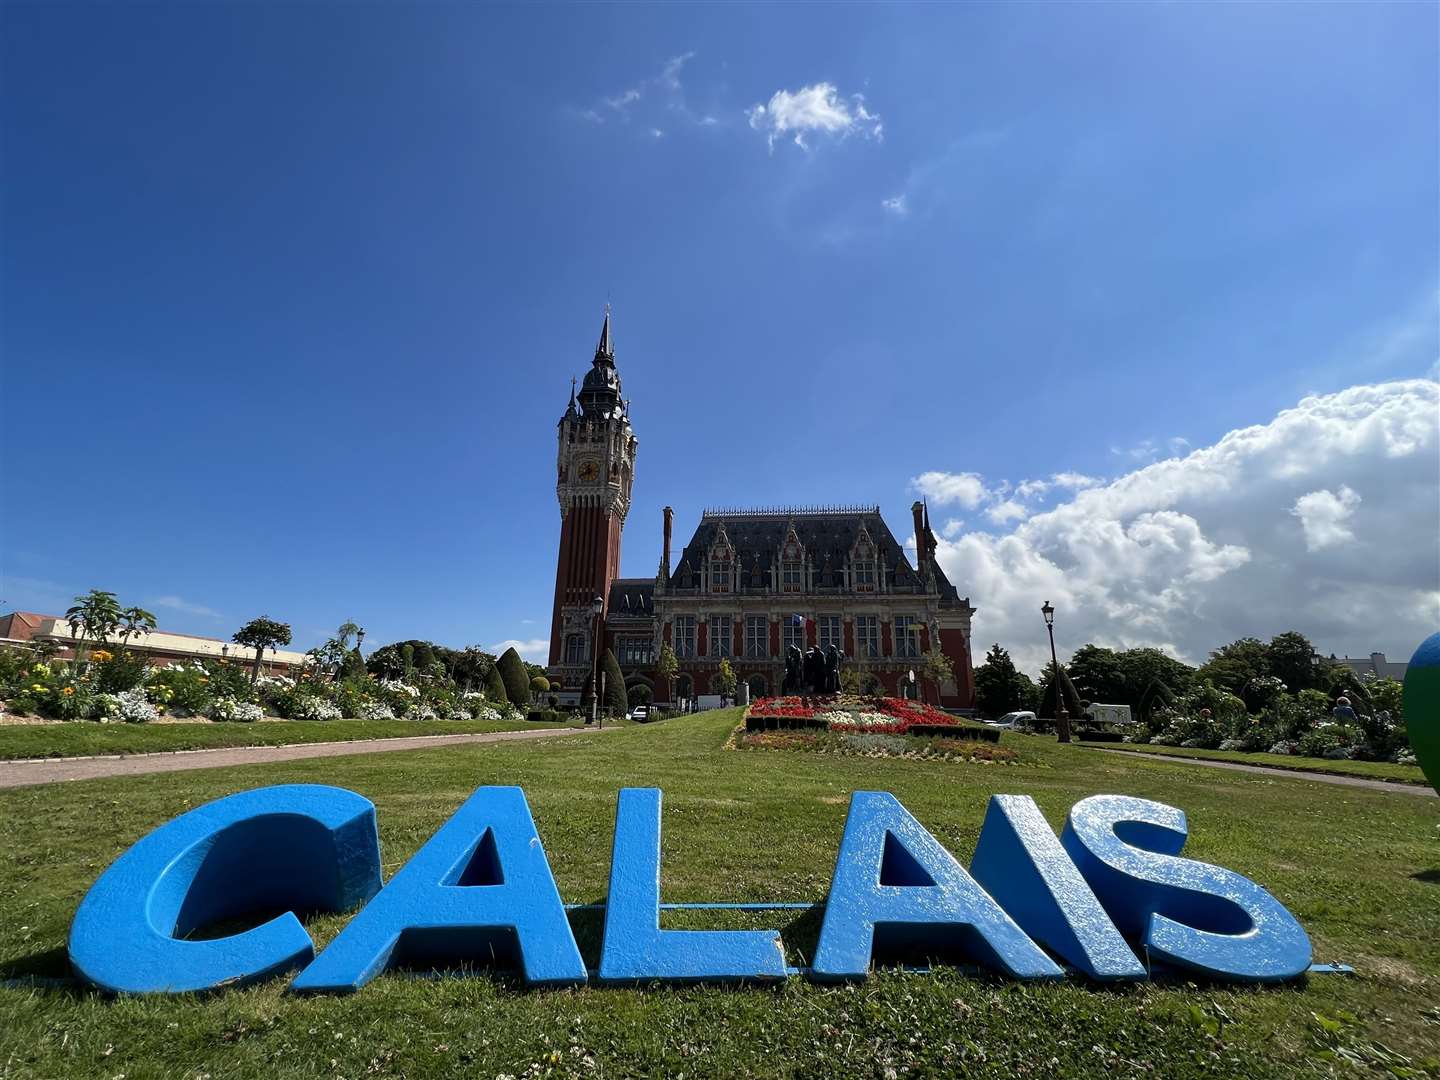 Calais town hall with its impressive belfry